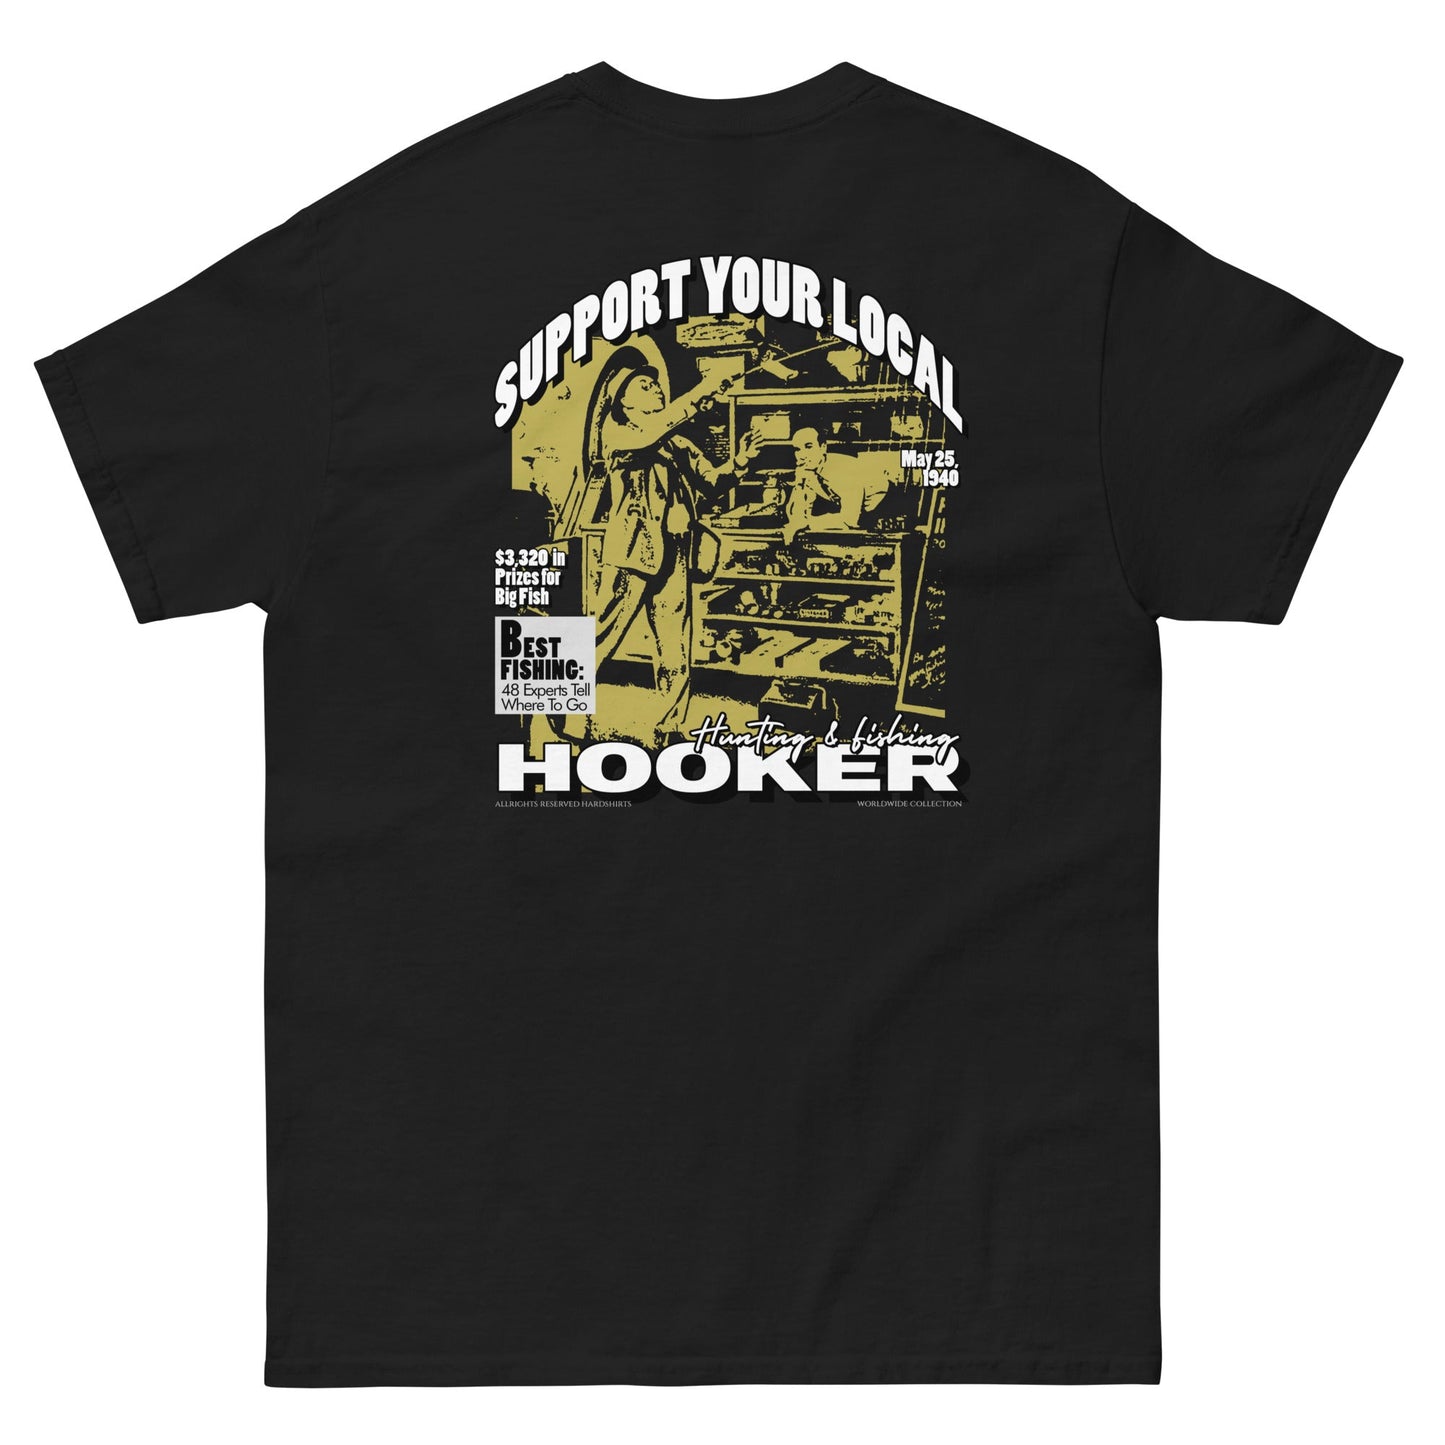 SUPPORT YOUR LOCAL HOOKER ( Front + Back ) – HardShirts